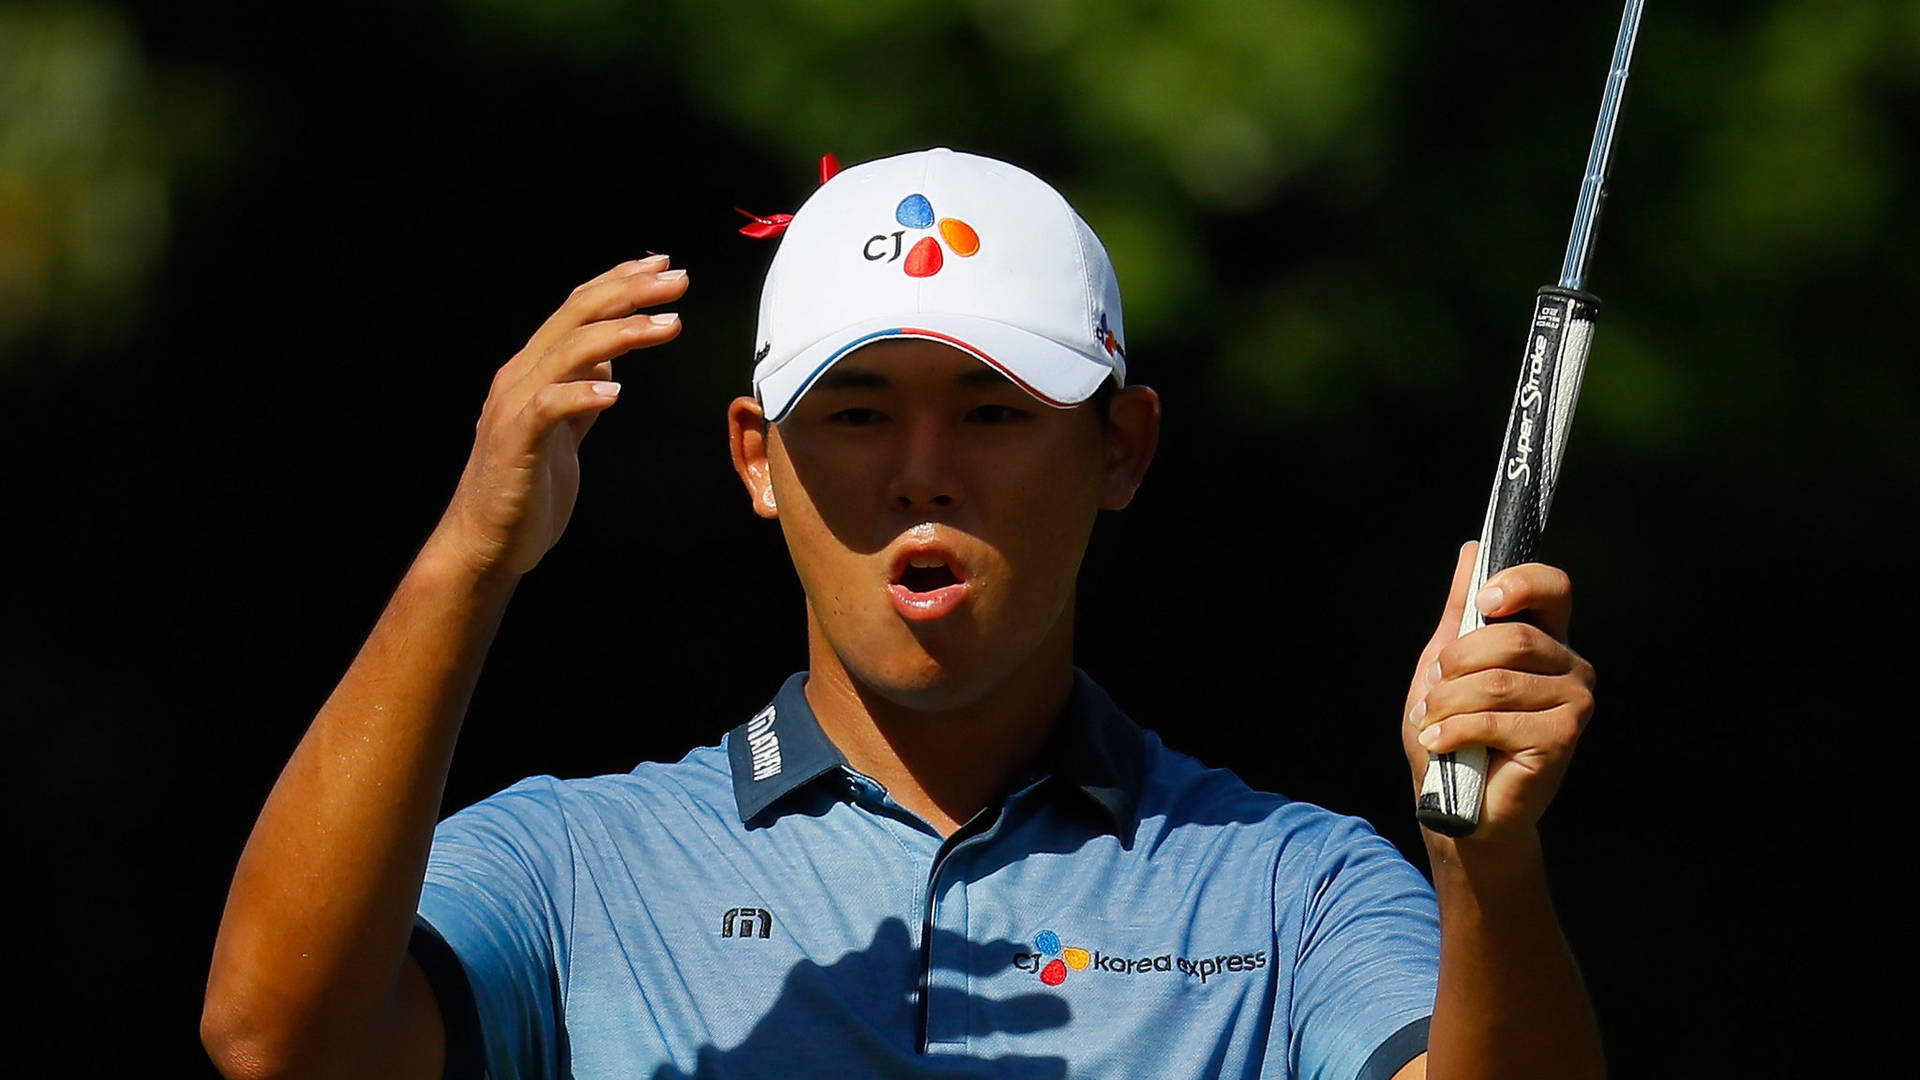 Pro Golfer Si Woo Kim Showing a Shocked Expression Wallpaper